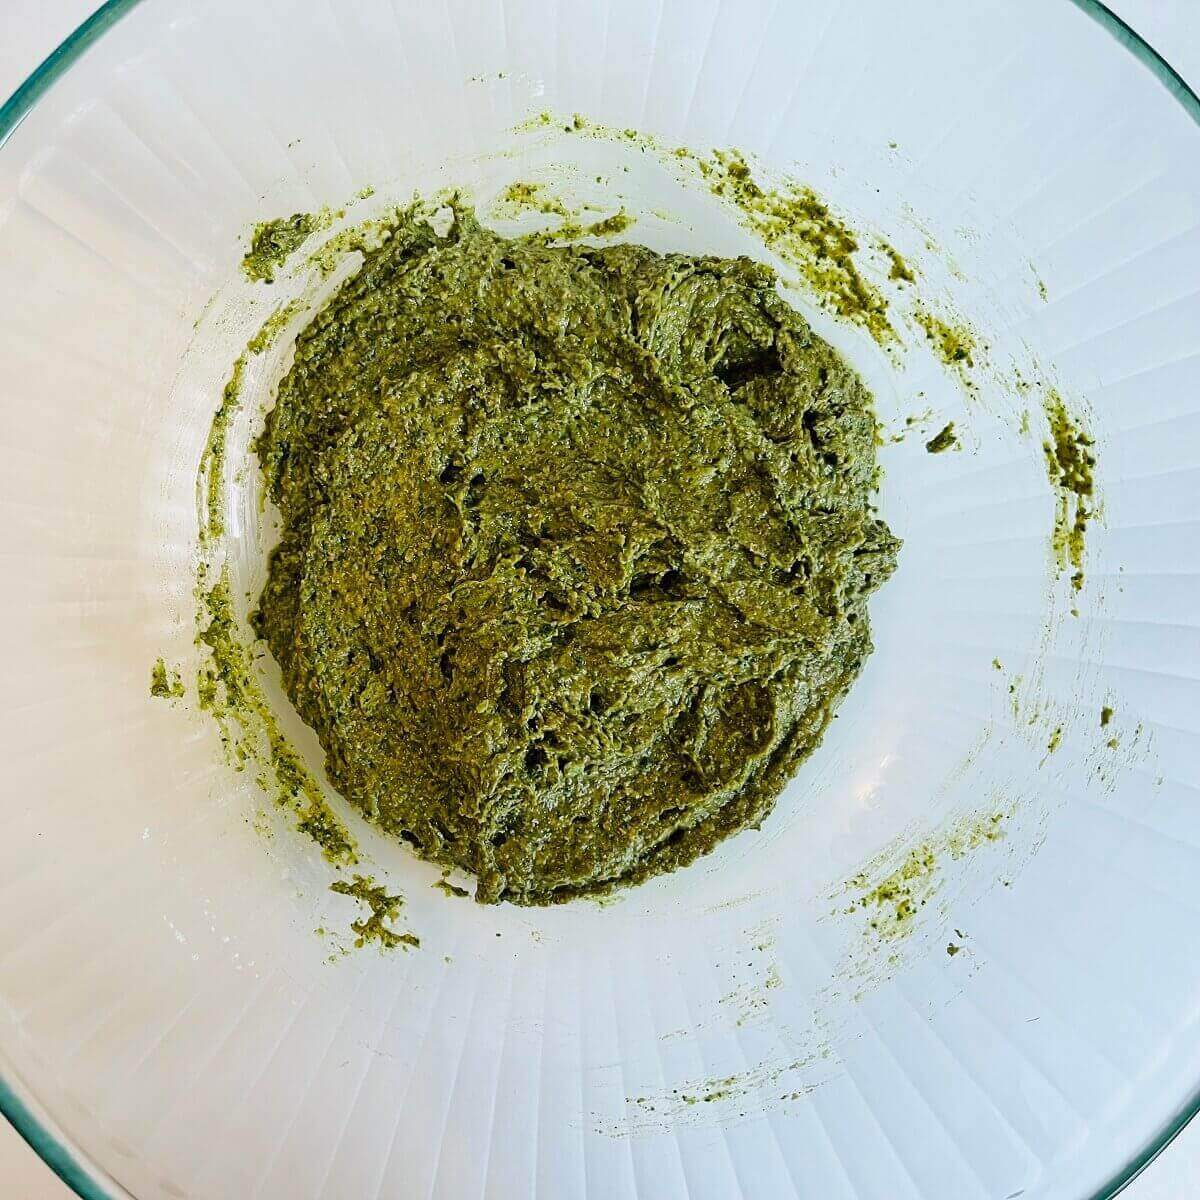 Kale cookie dough in a glass mixing bowl.